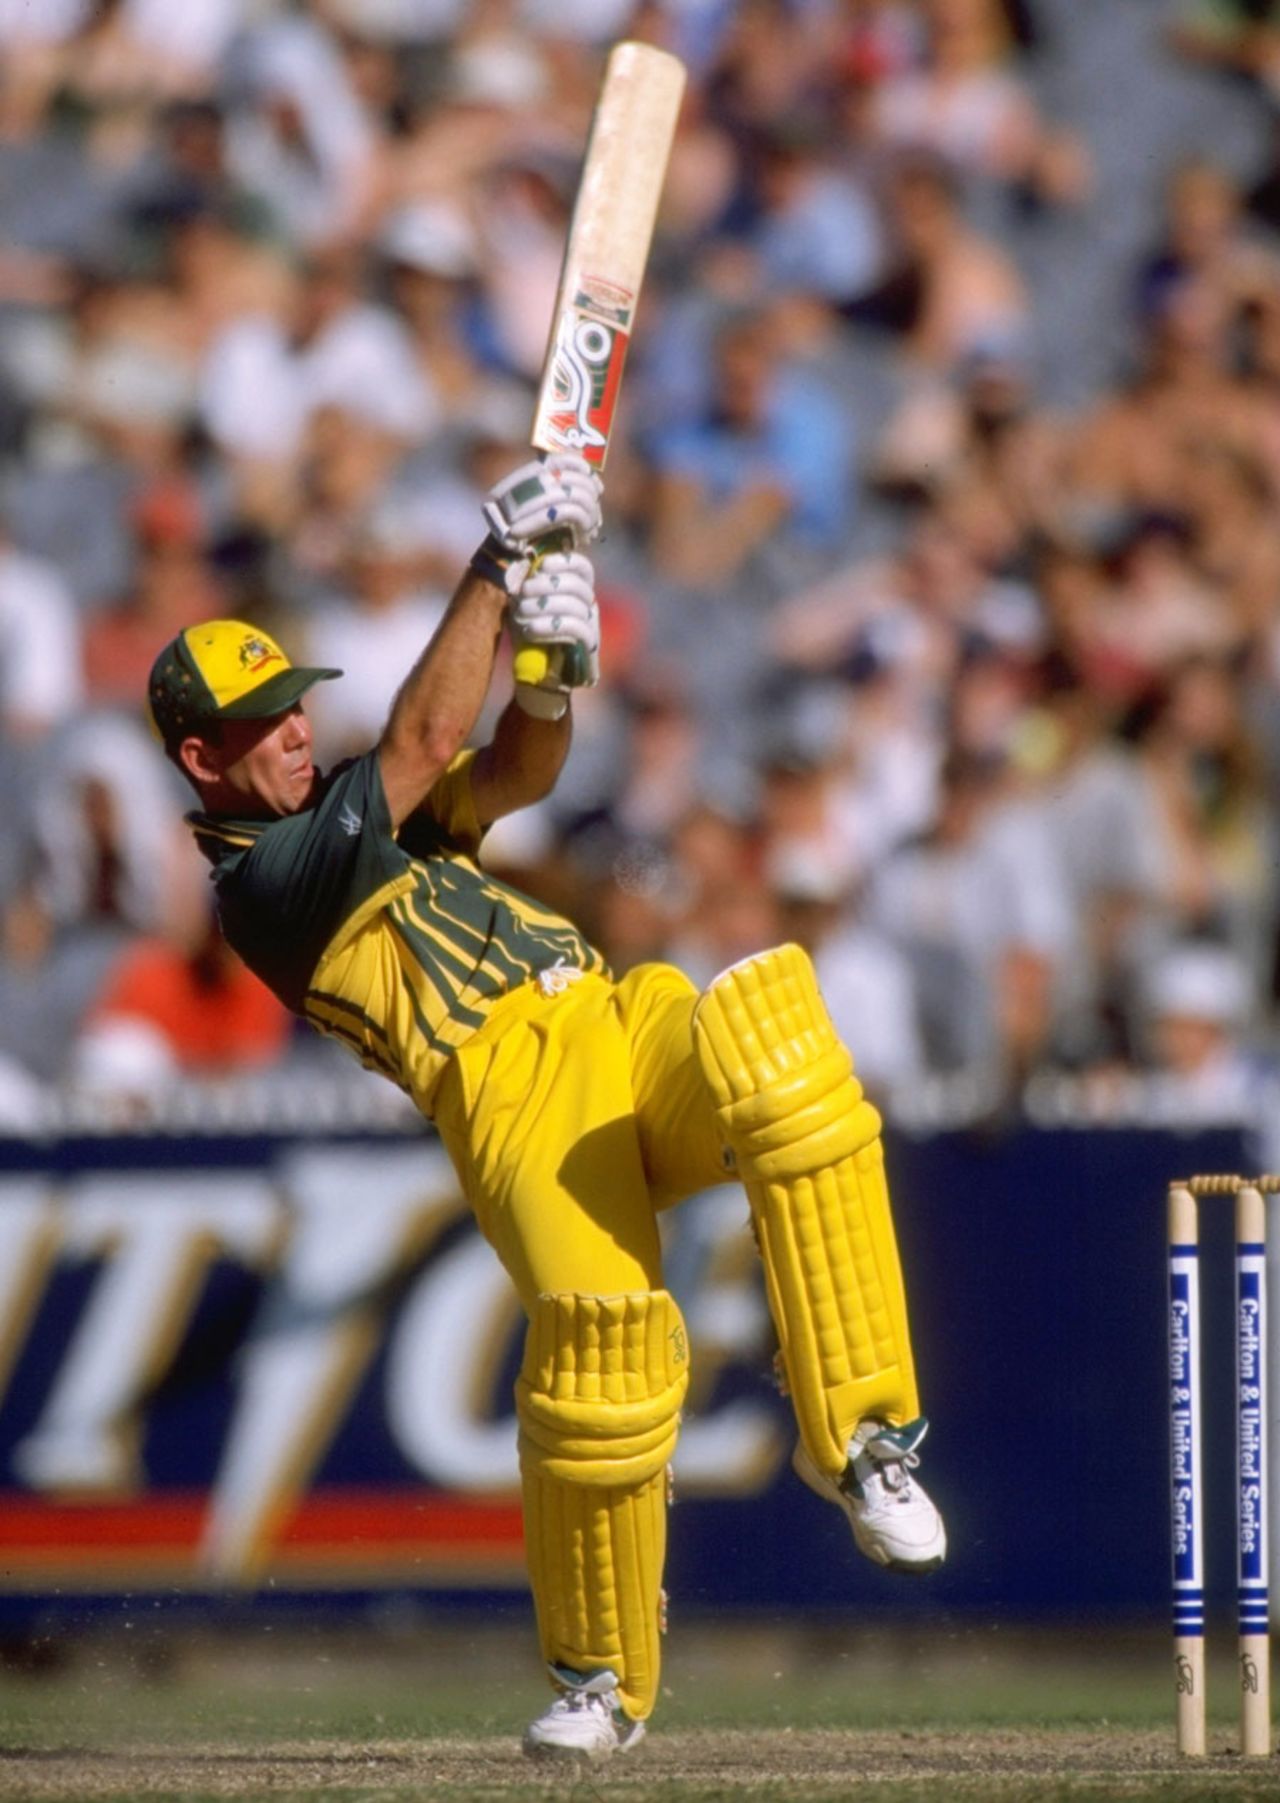 Ricky Ponting pulls on the way to a century, Australia v New Zealand, CUODS, Melbourne Cricket Ground, January 21st 1998.